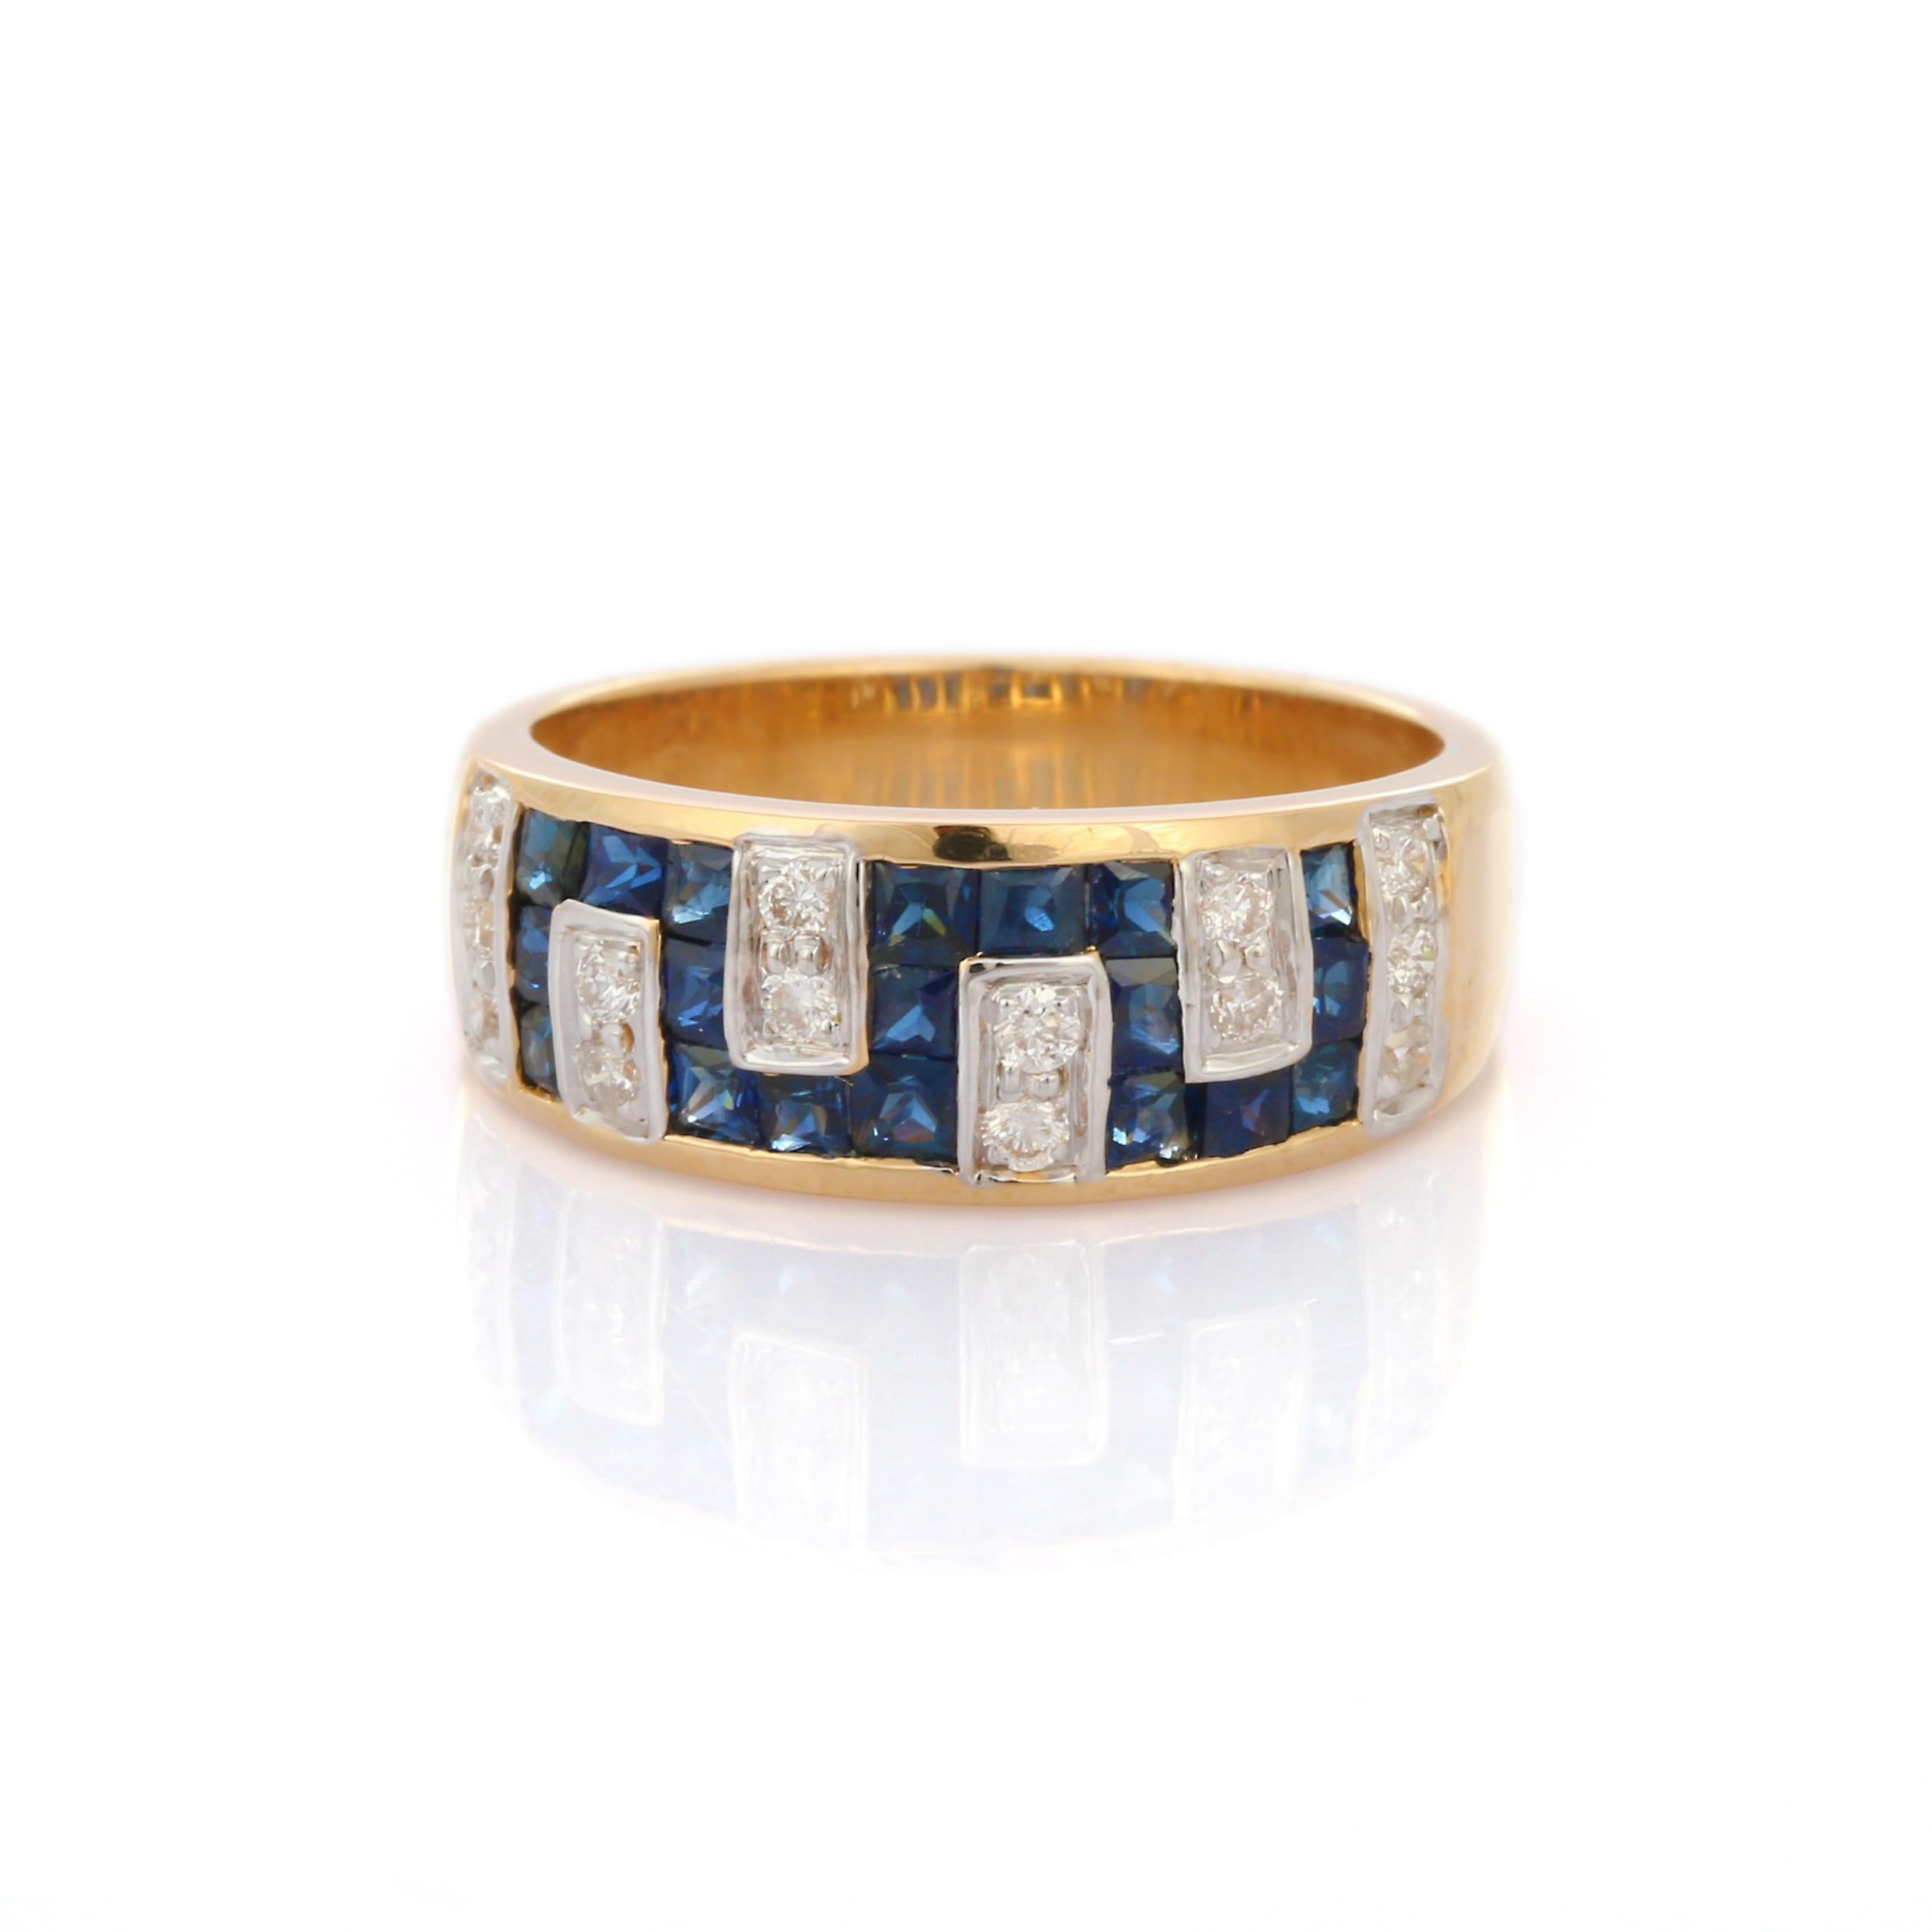 For Sale:  Greek Style Blue Sapphire and Diamond Band Ring 14k Solid Yellow Gold 5